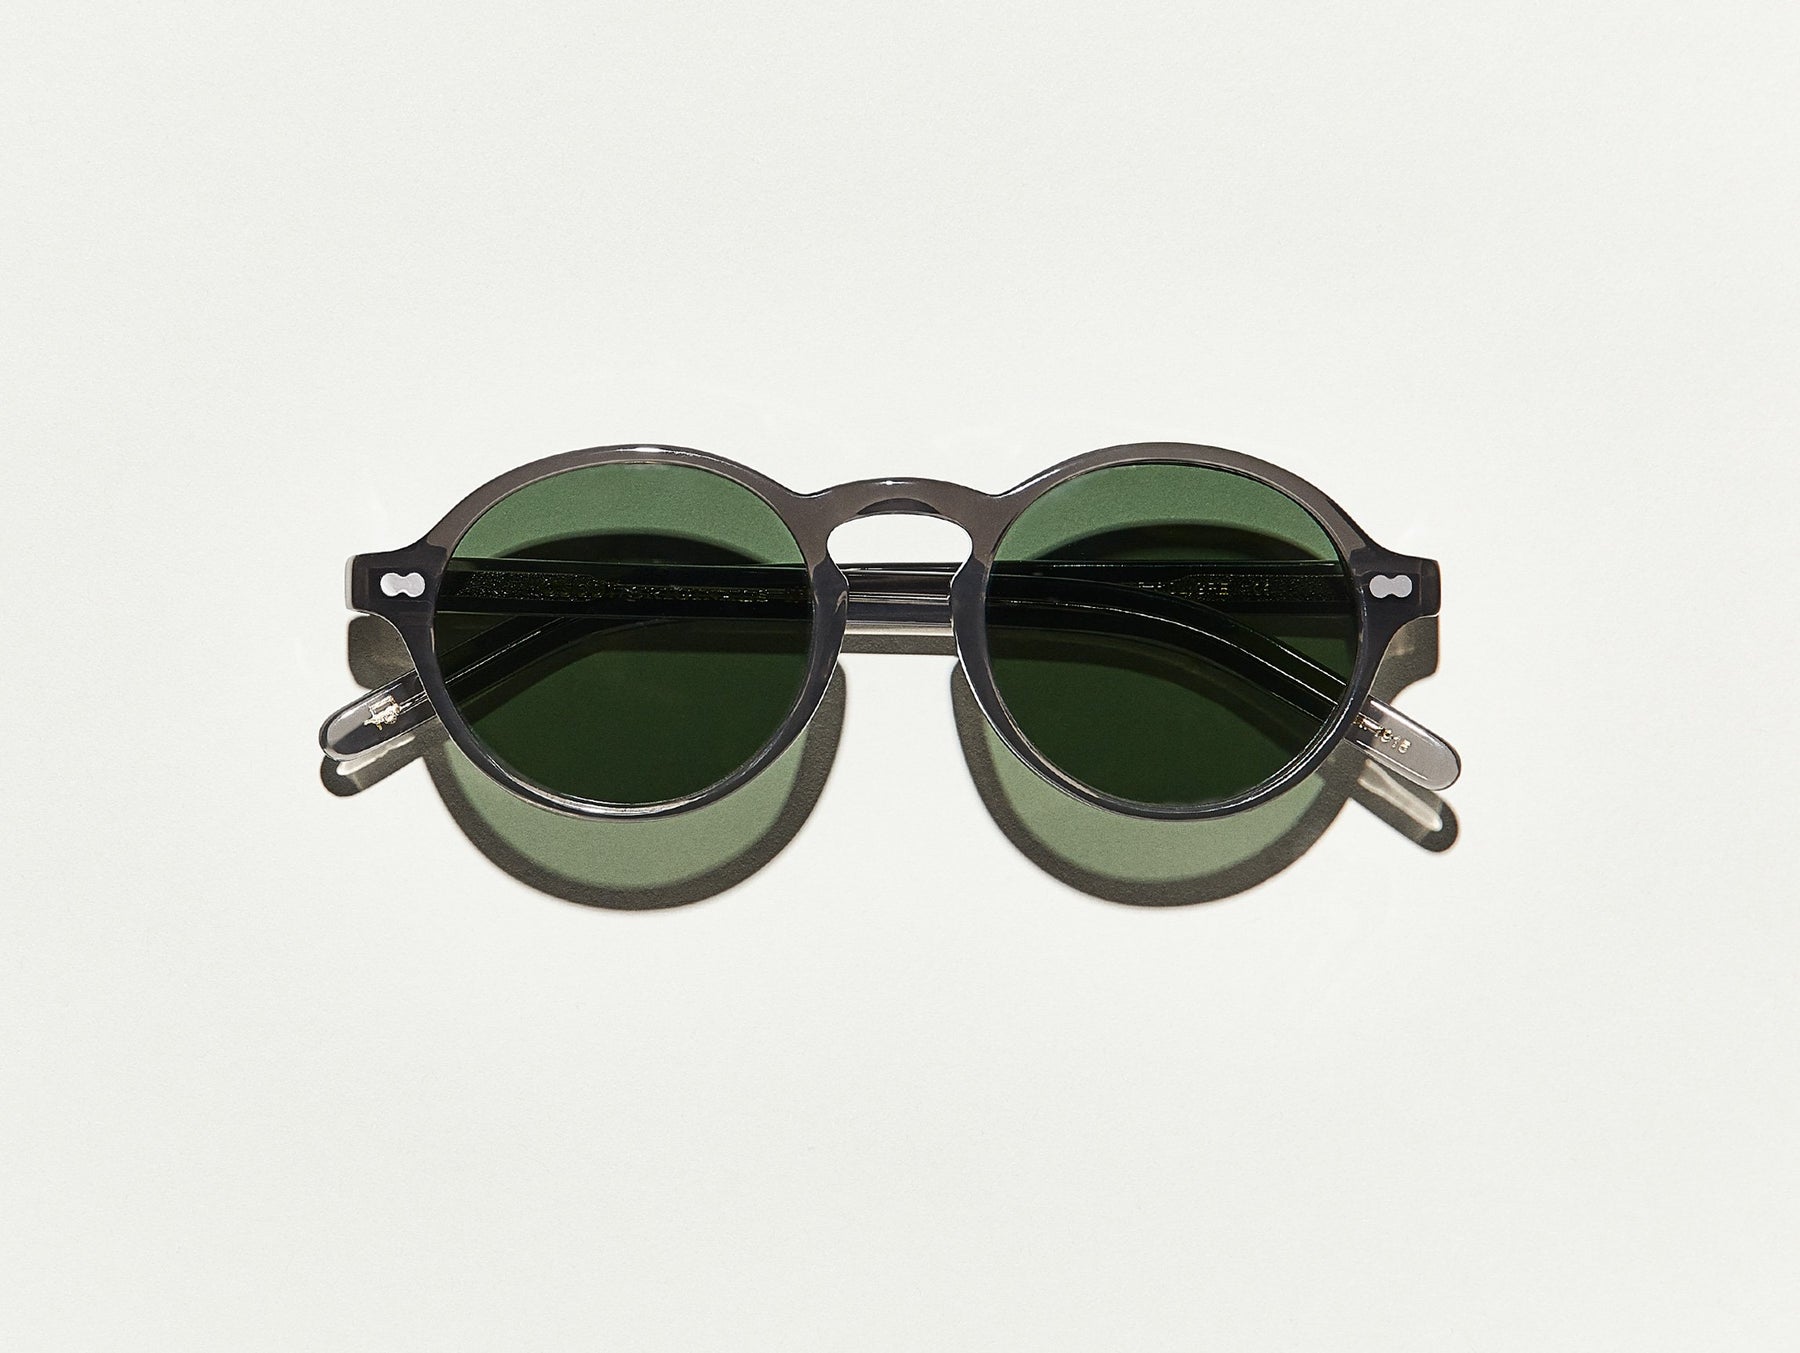 The GLICK SUN in Grey with G-15 Glass Lenses